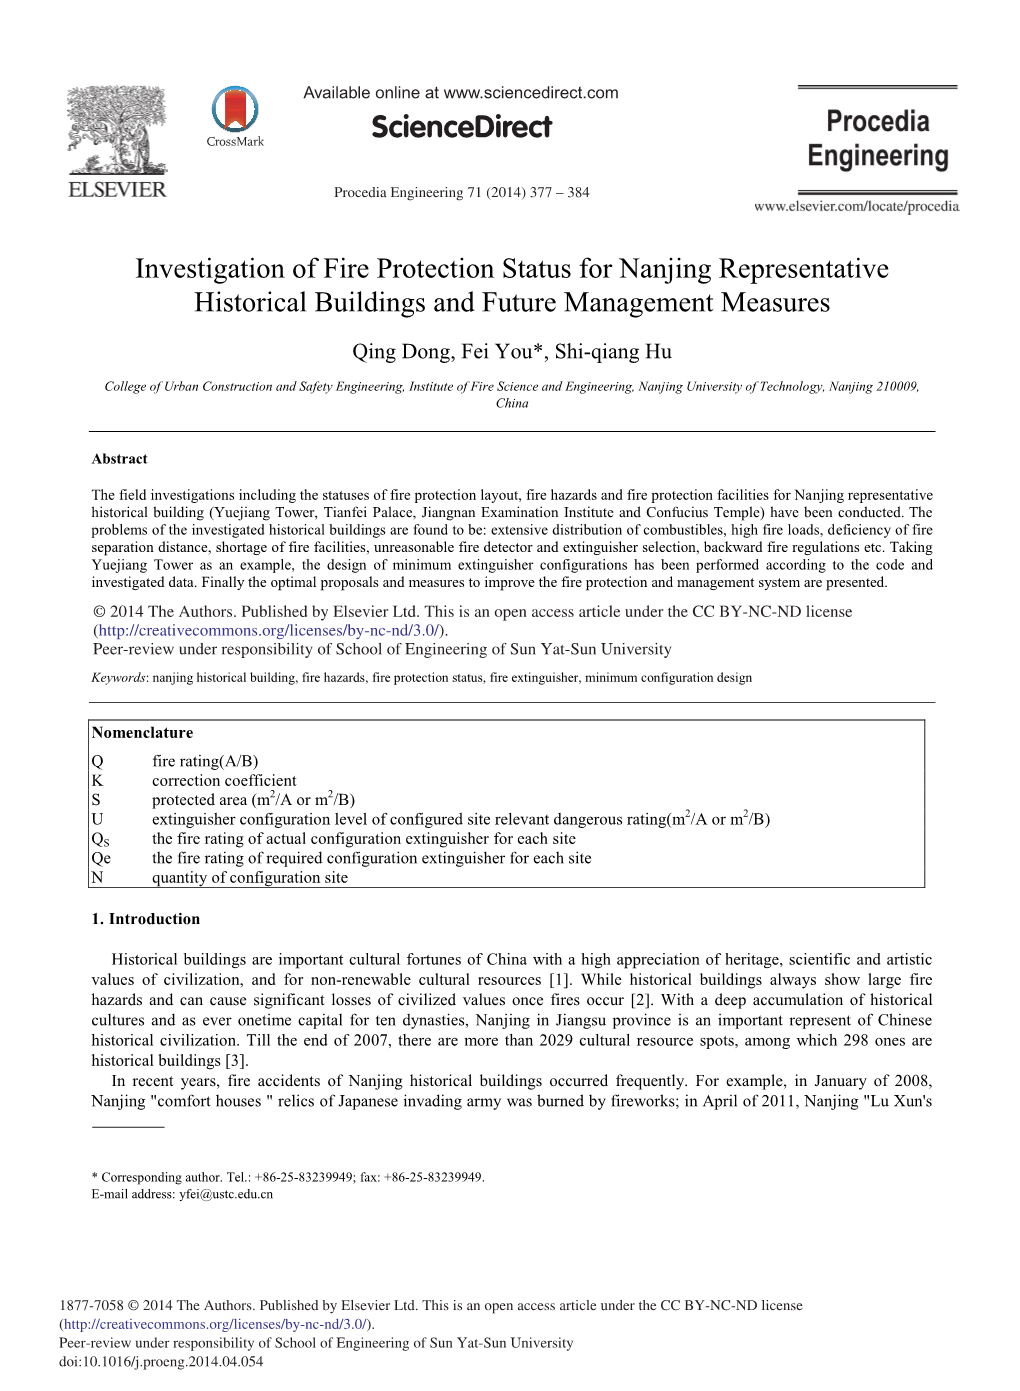 Investigation of Fire Protection Status for Nanjing Representative Historical Buildings and Future Management Measures